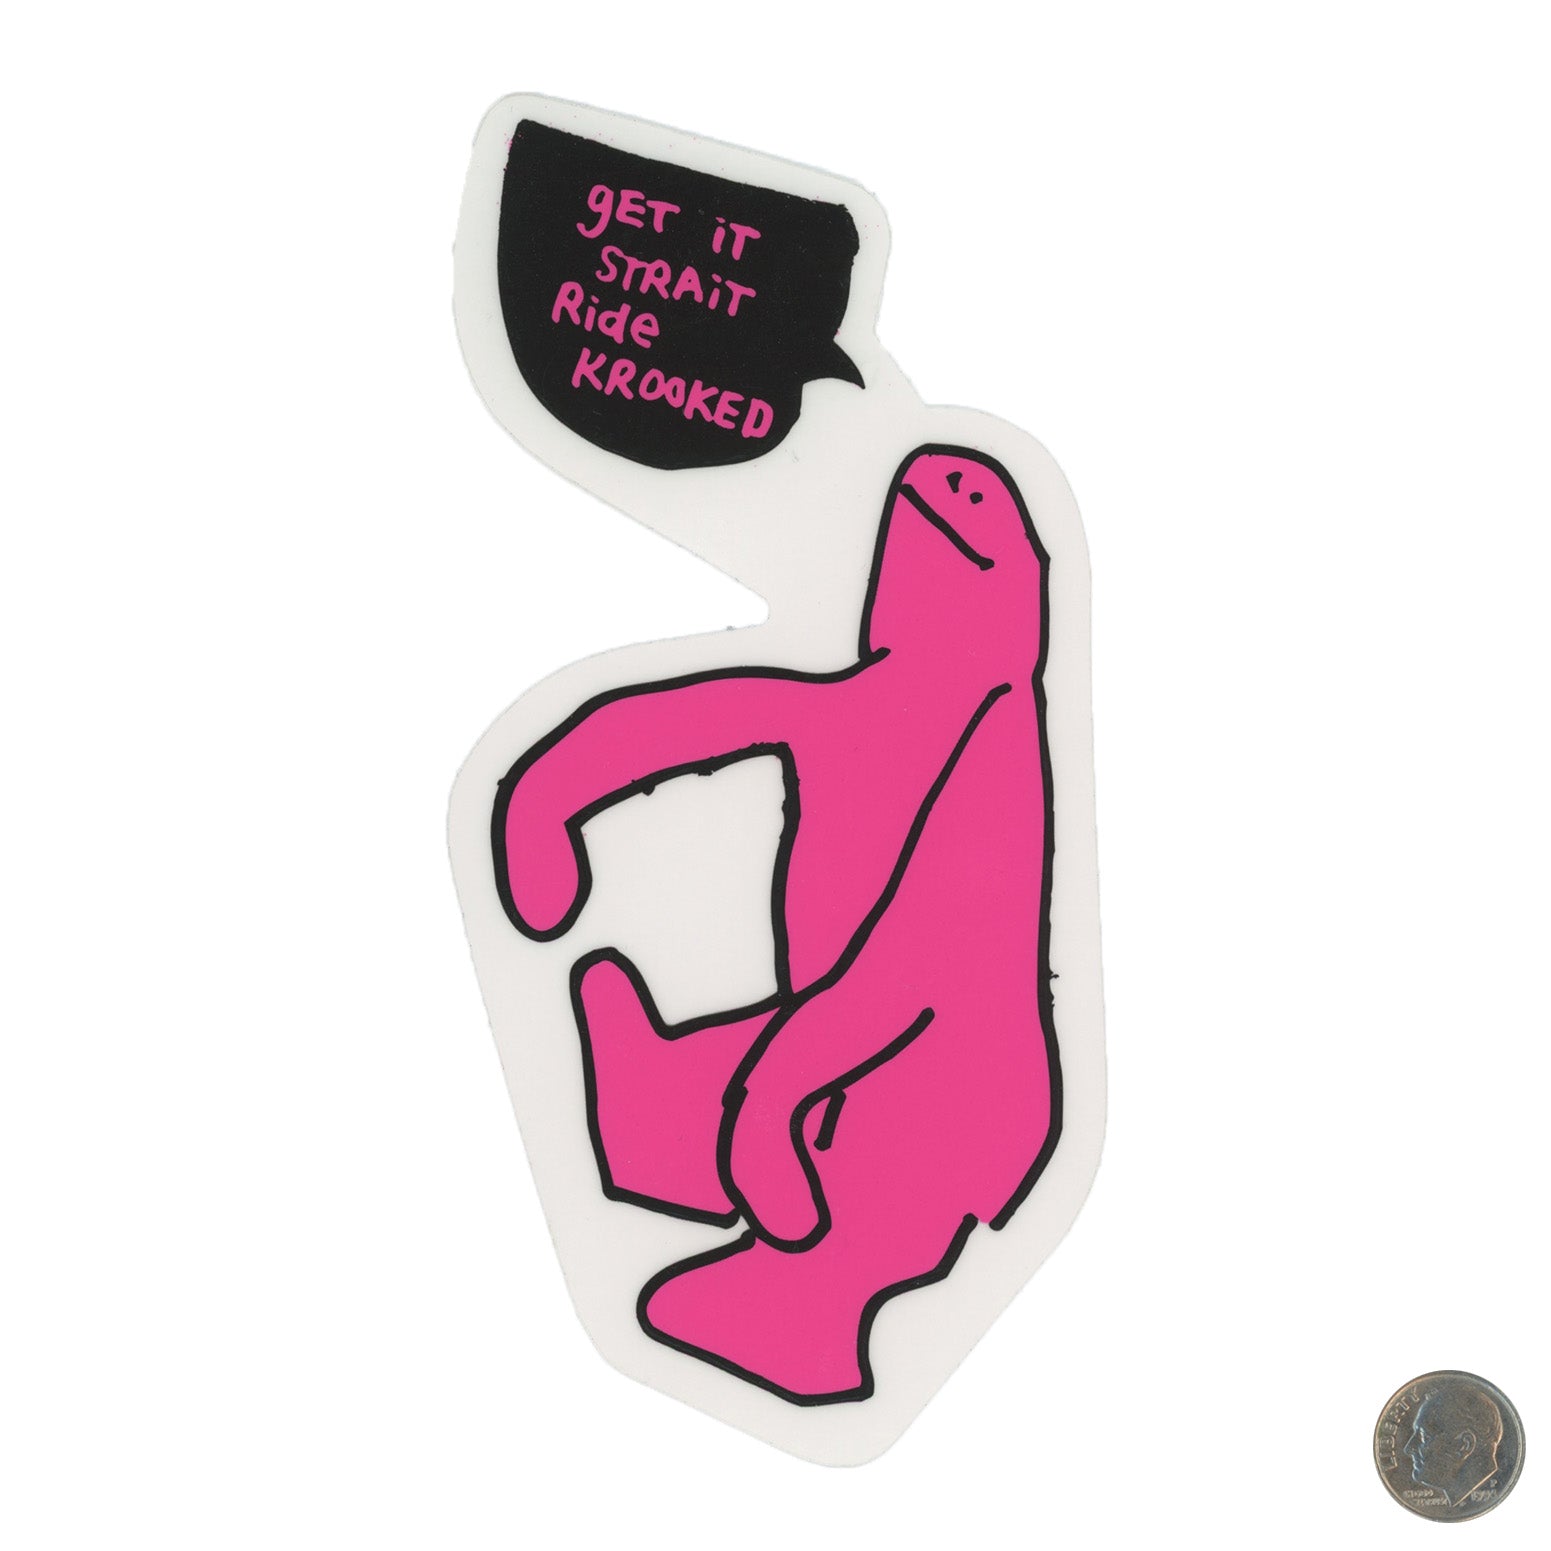 Krooked Skateboarding Get It Straight Ride Krooked Pink Sticker with dime